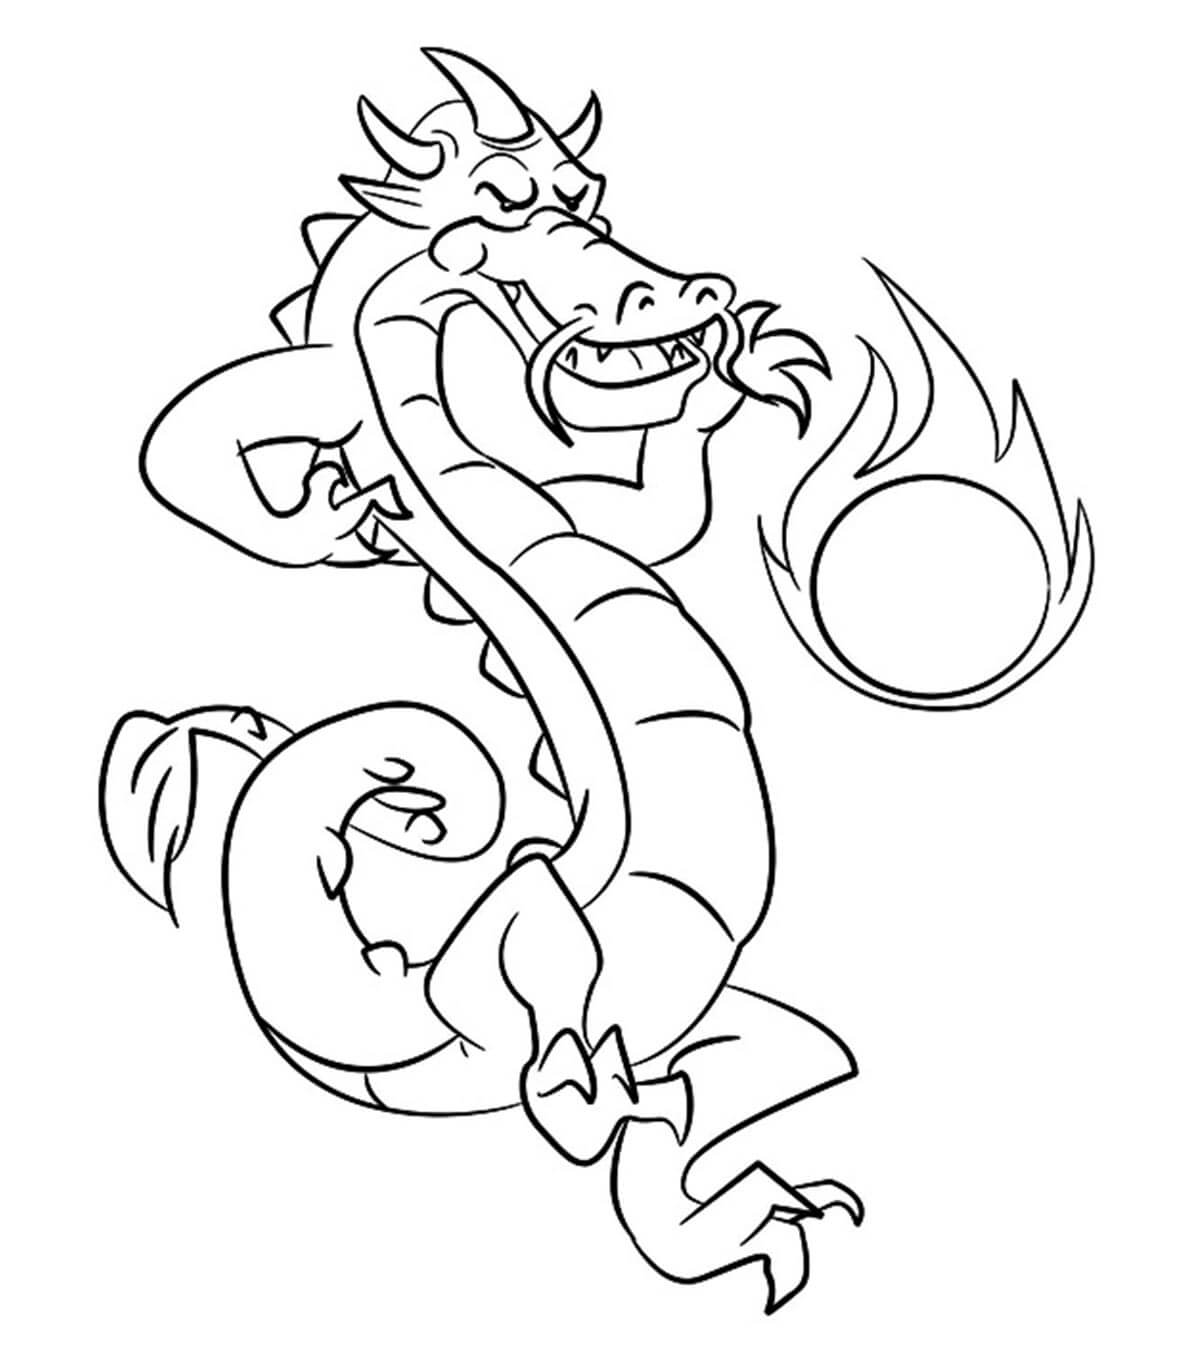 Powerful Chinese Dragon Coloring Page